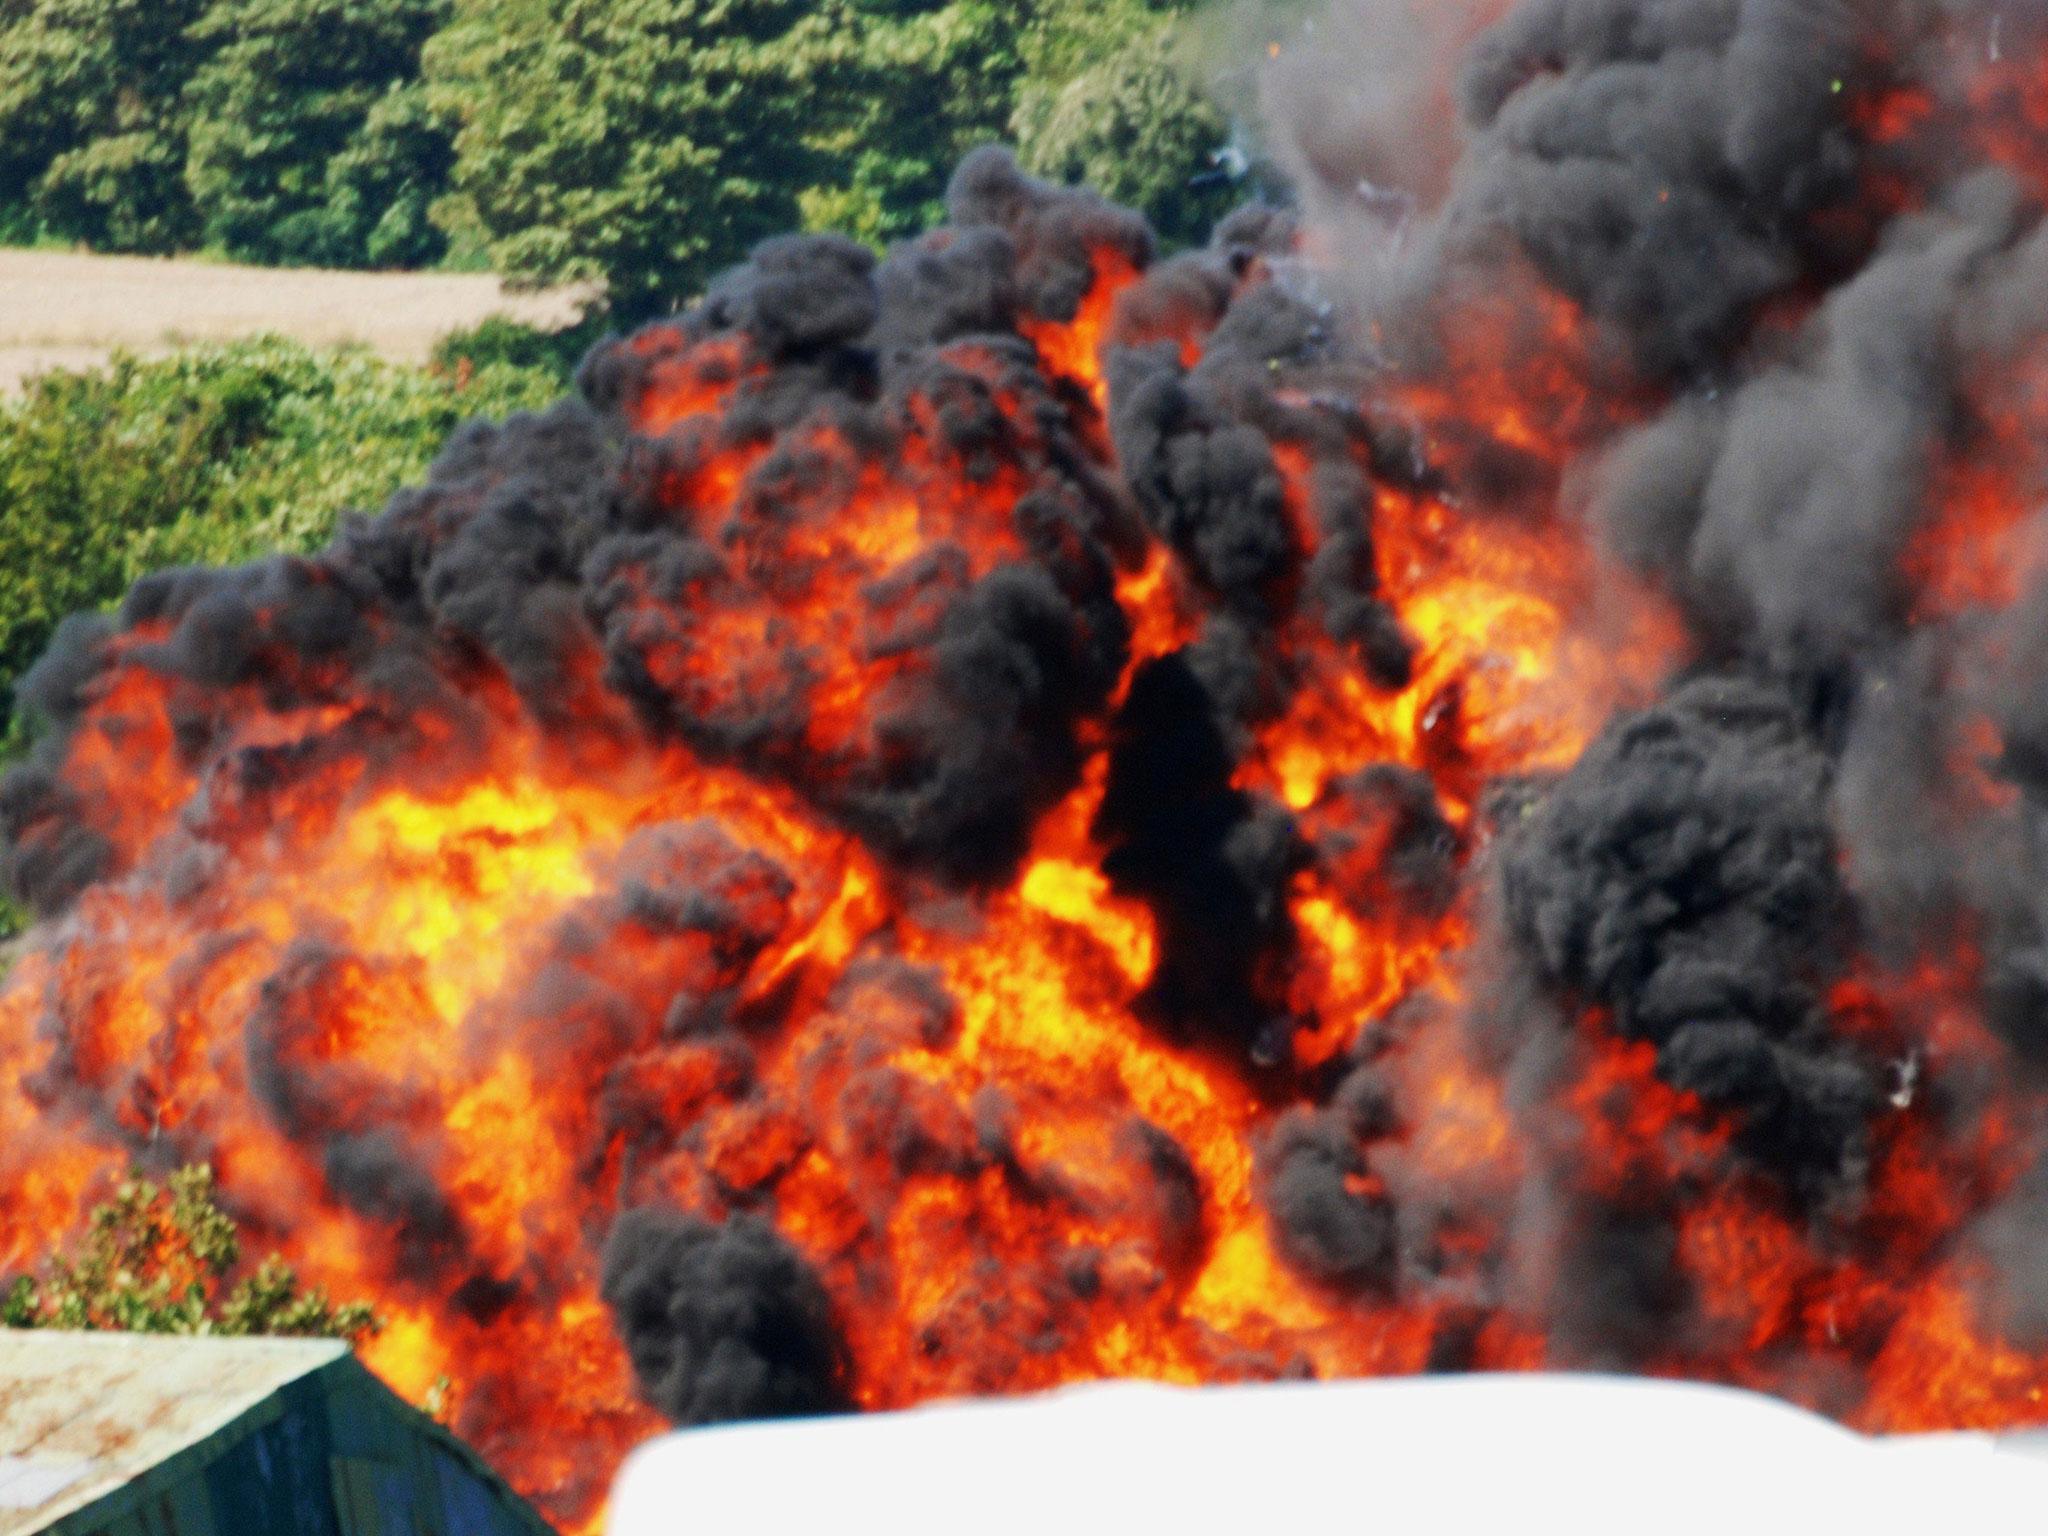 An explosion at the Shoreham Air Show, in Sussex, Britain, 22 August 2015, after a fighter jet crashed